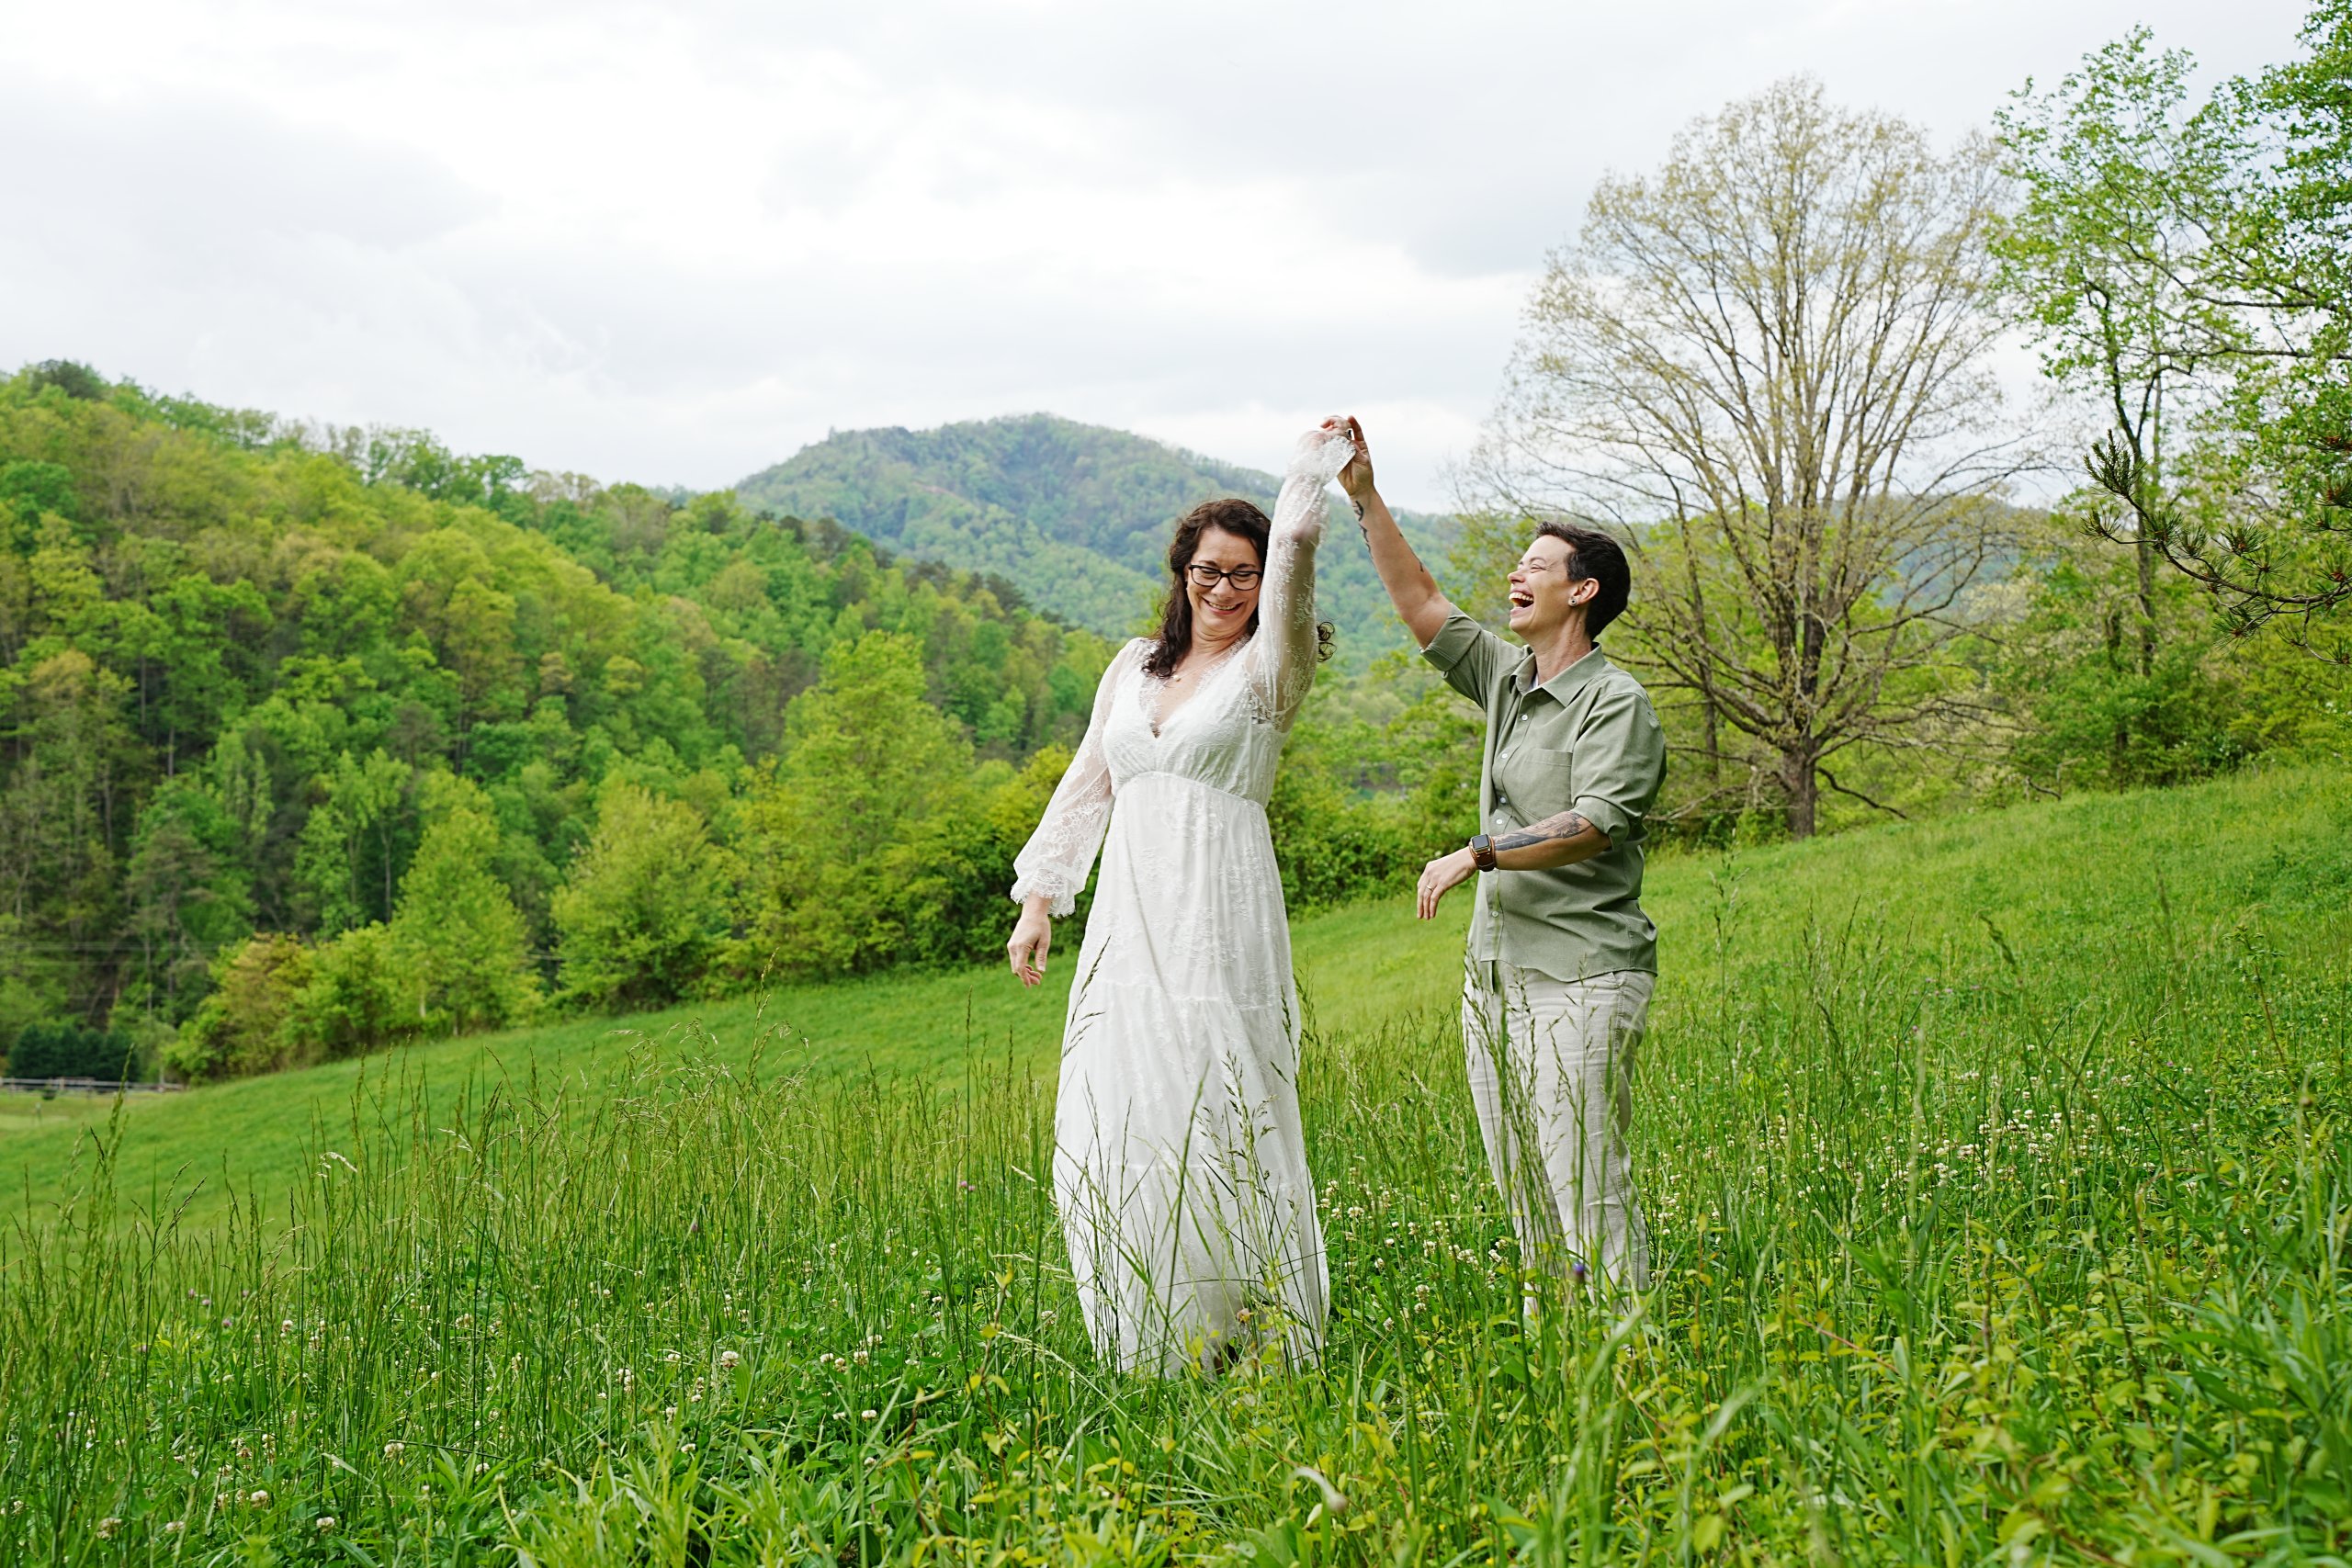 Same sex female wedding couple dancing in a field at a mountain view on their wedding day